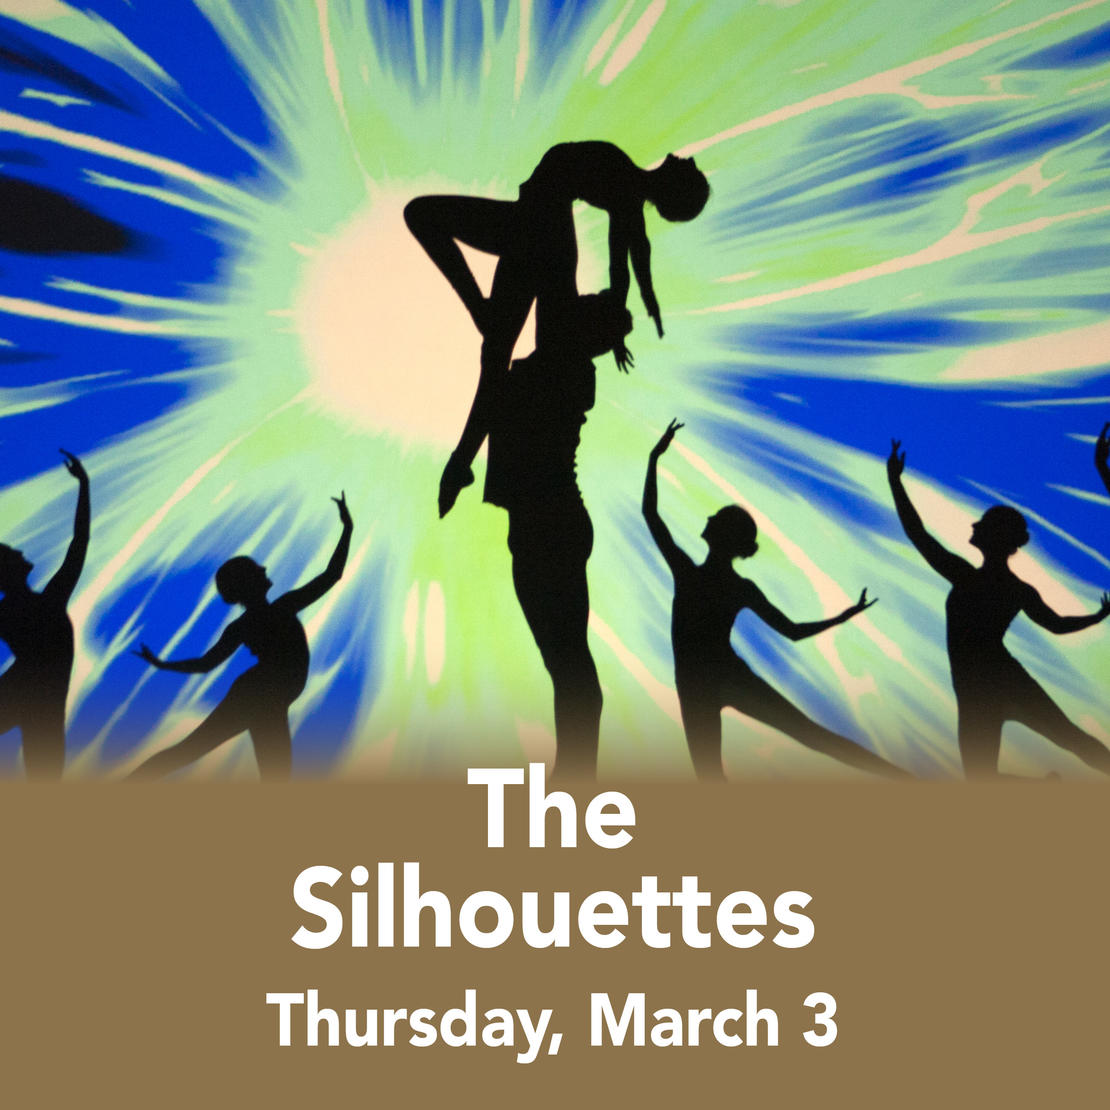 The Silhouettes